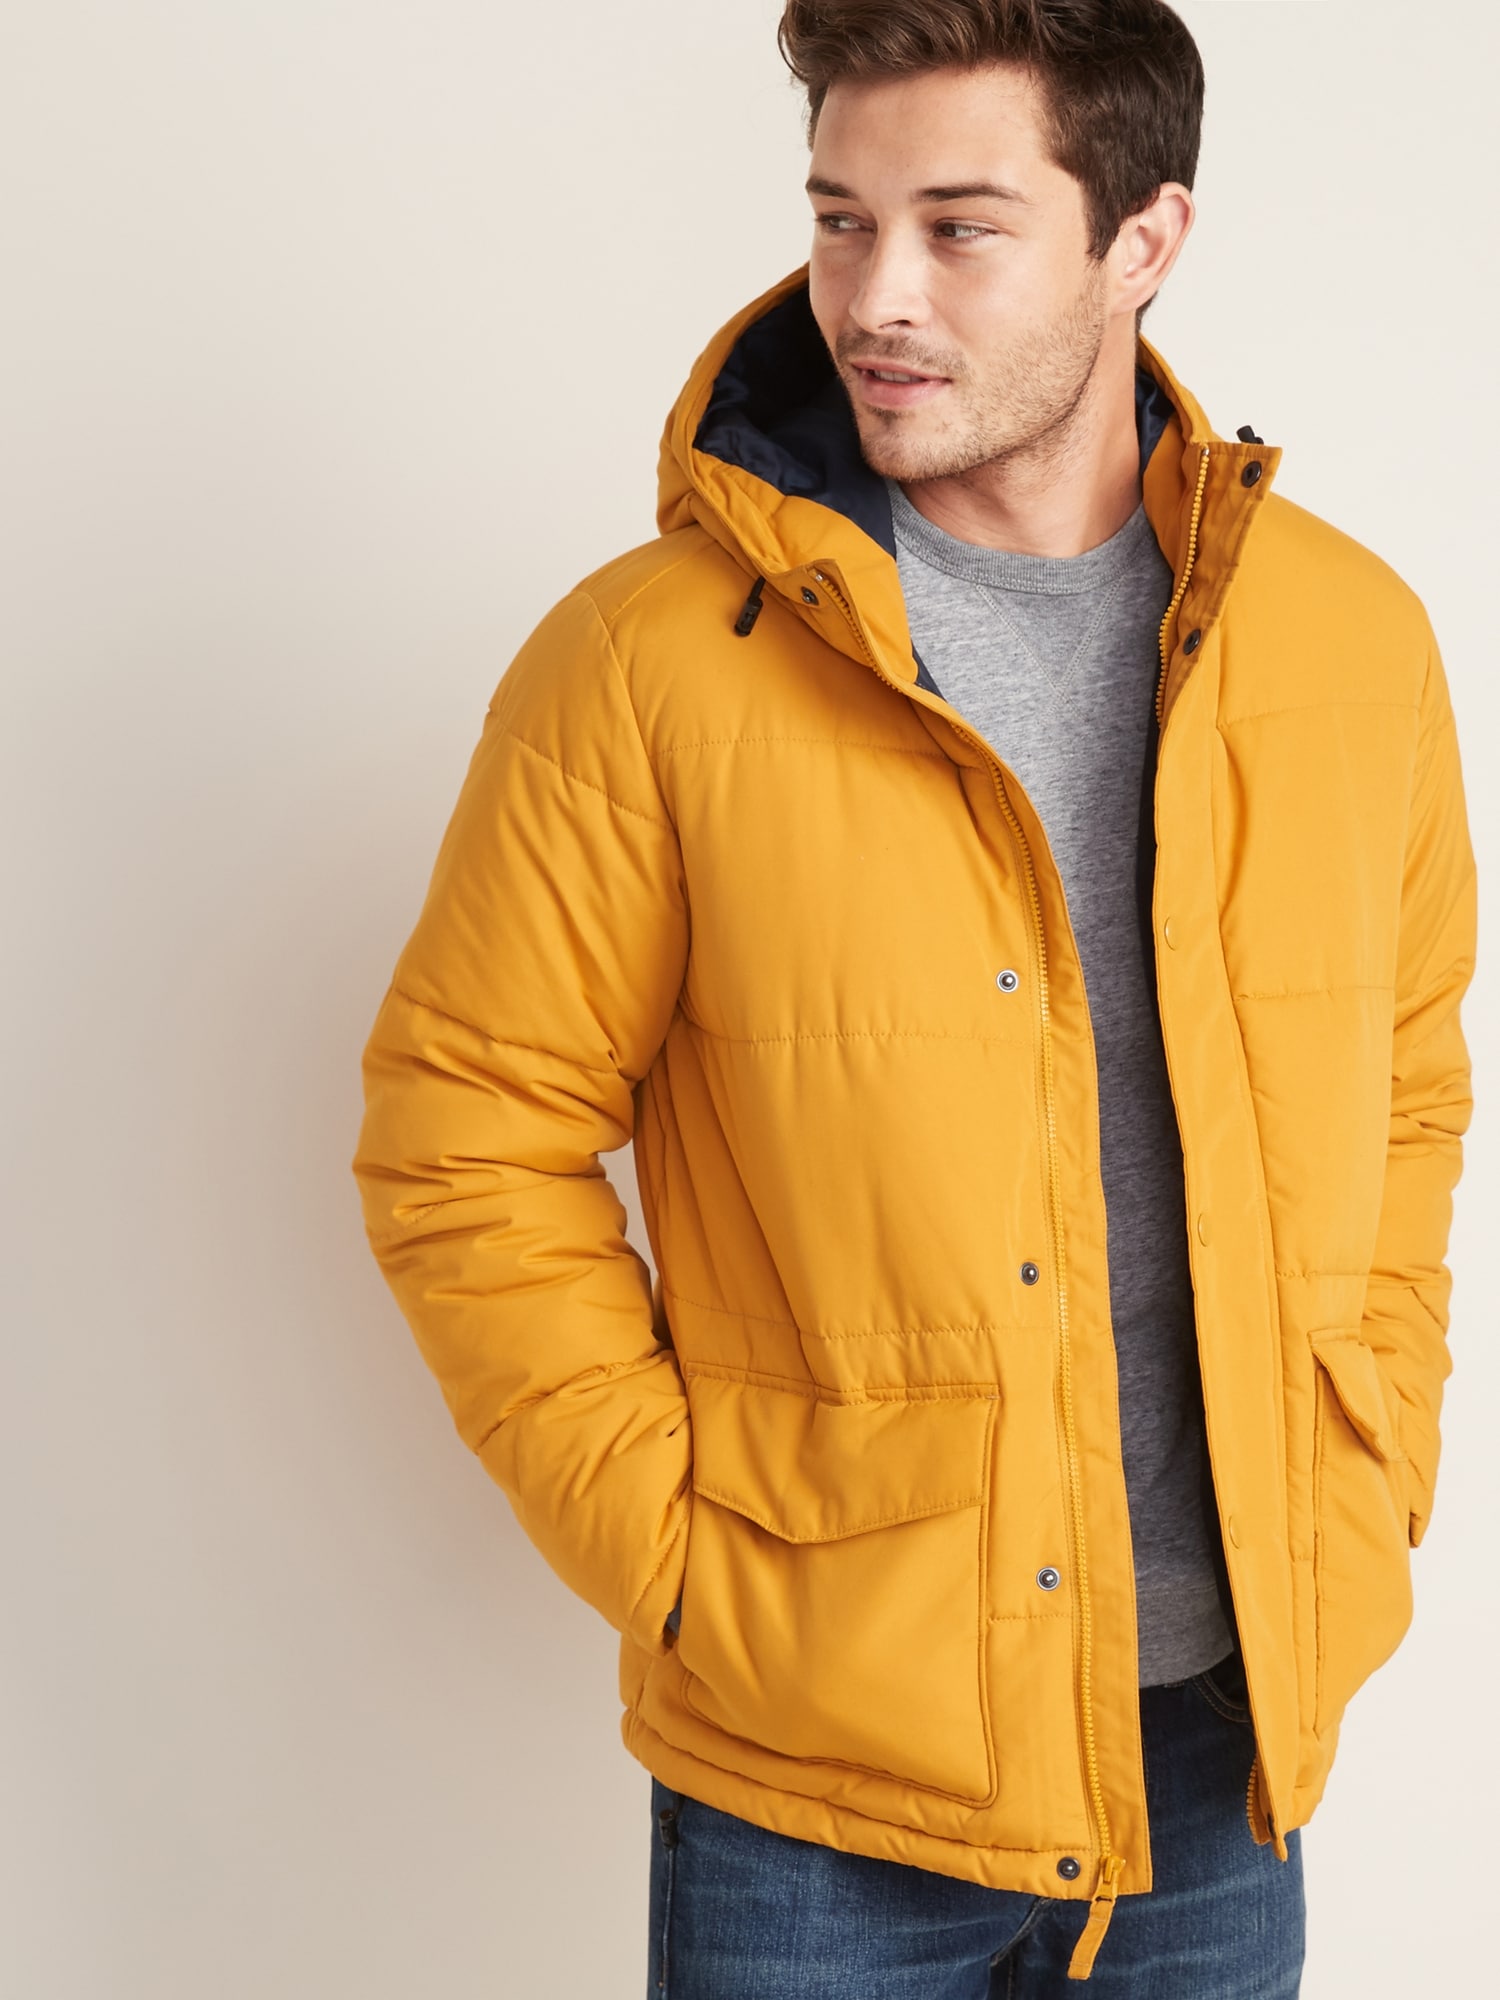 VTG without peer Gap classic Men's yellow Hooded Jacket RN 54023